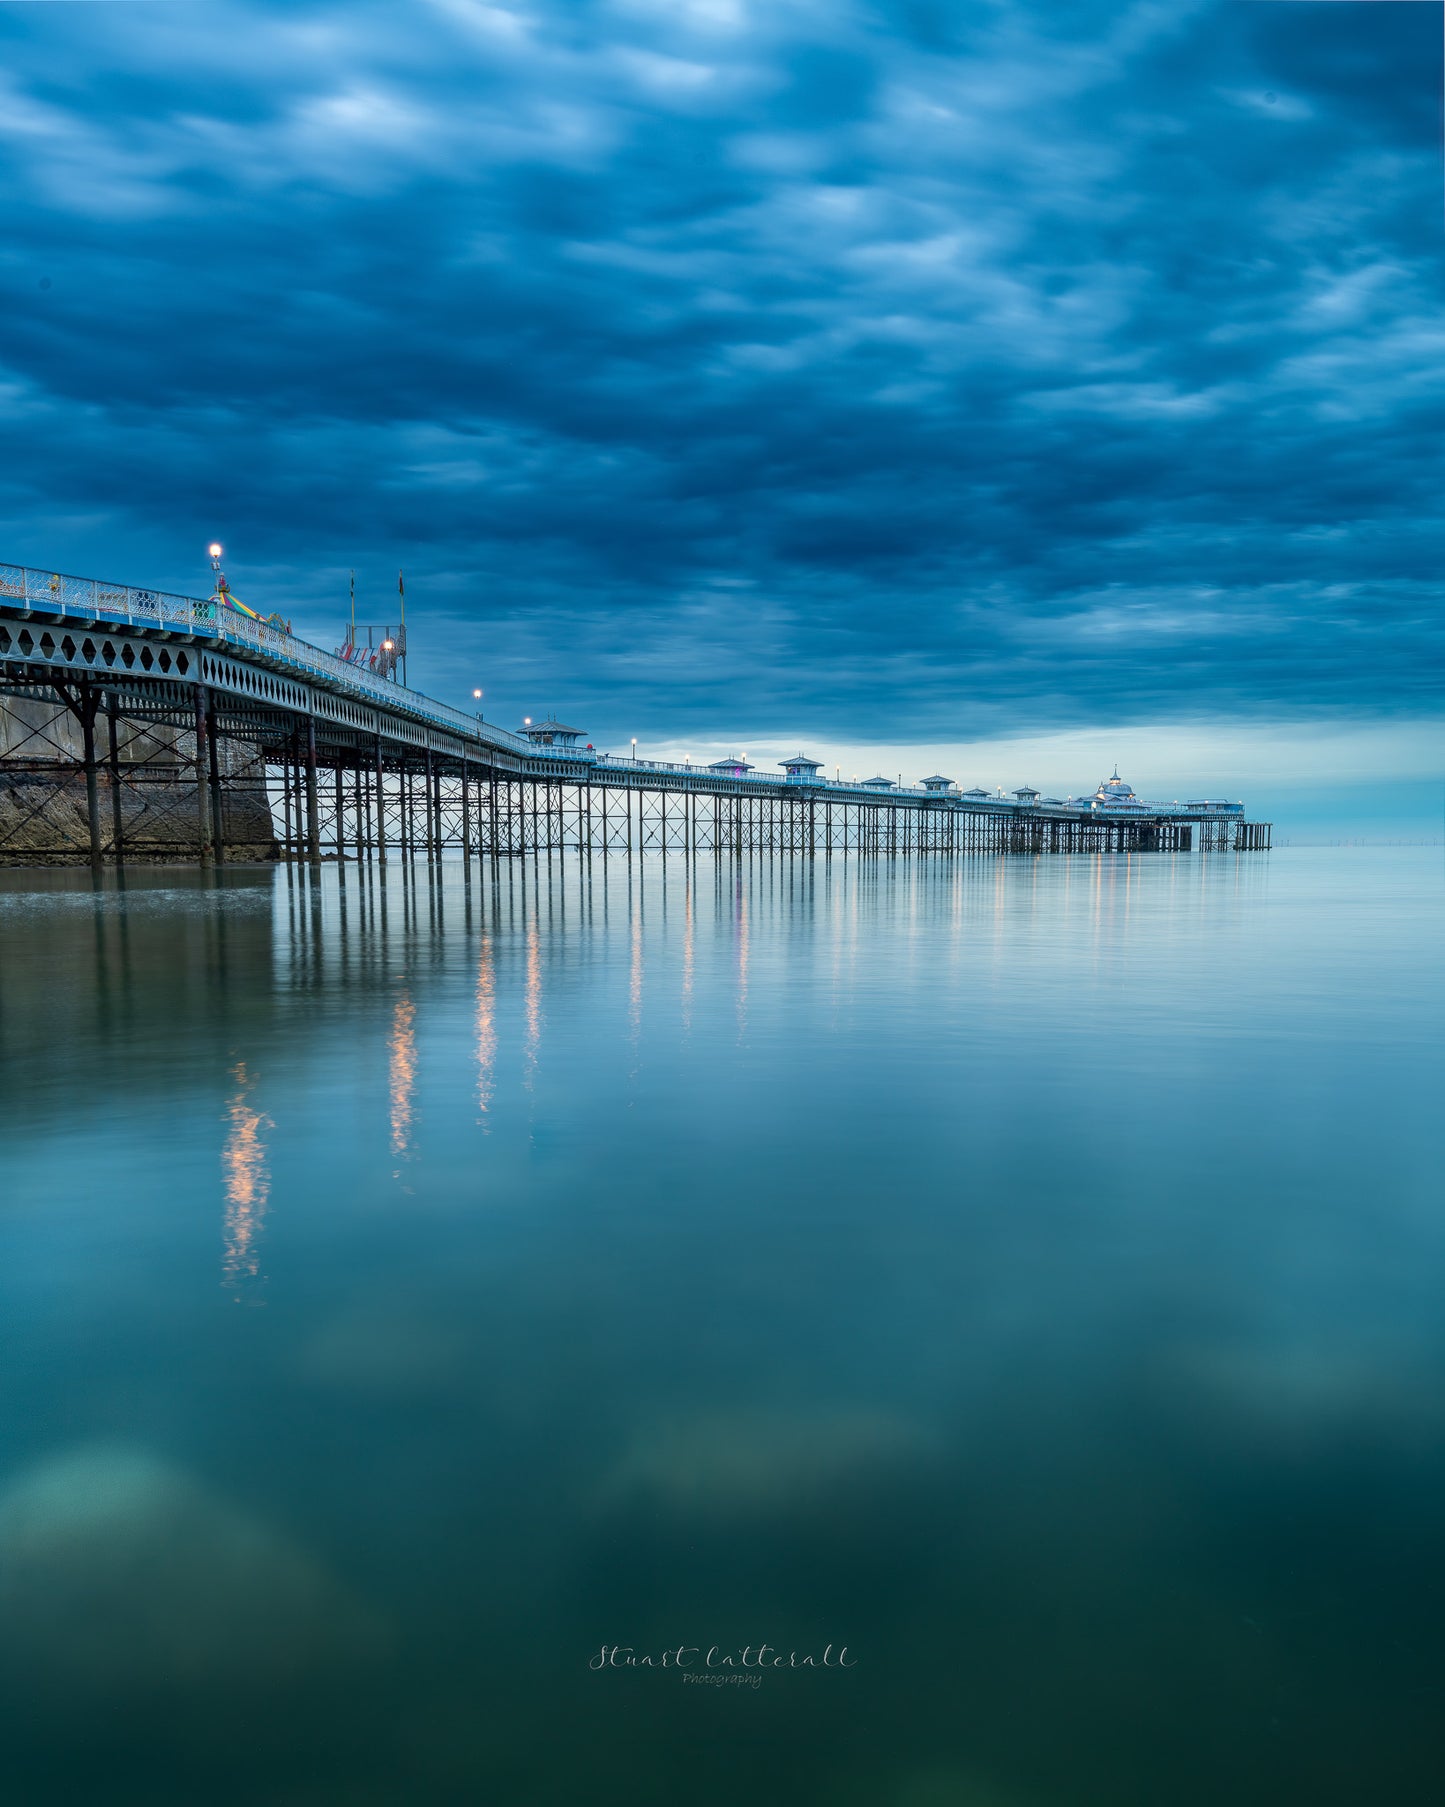 Calm waters at the Pier